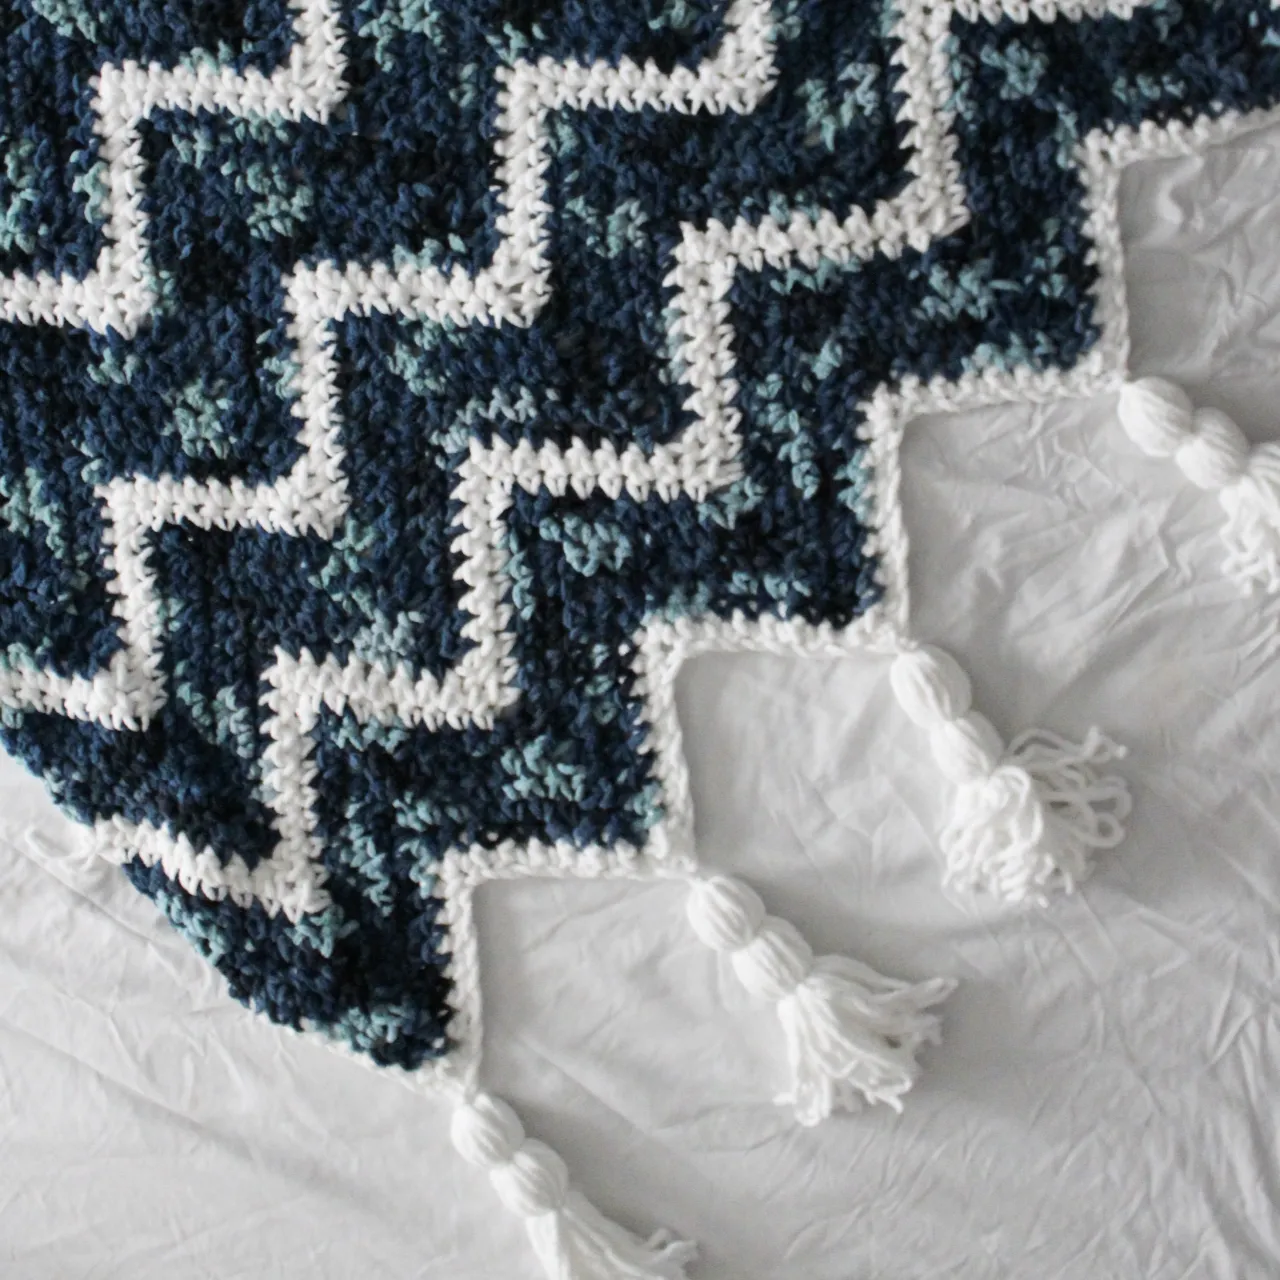 Chevron blanket made with variegated yarn